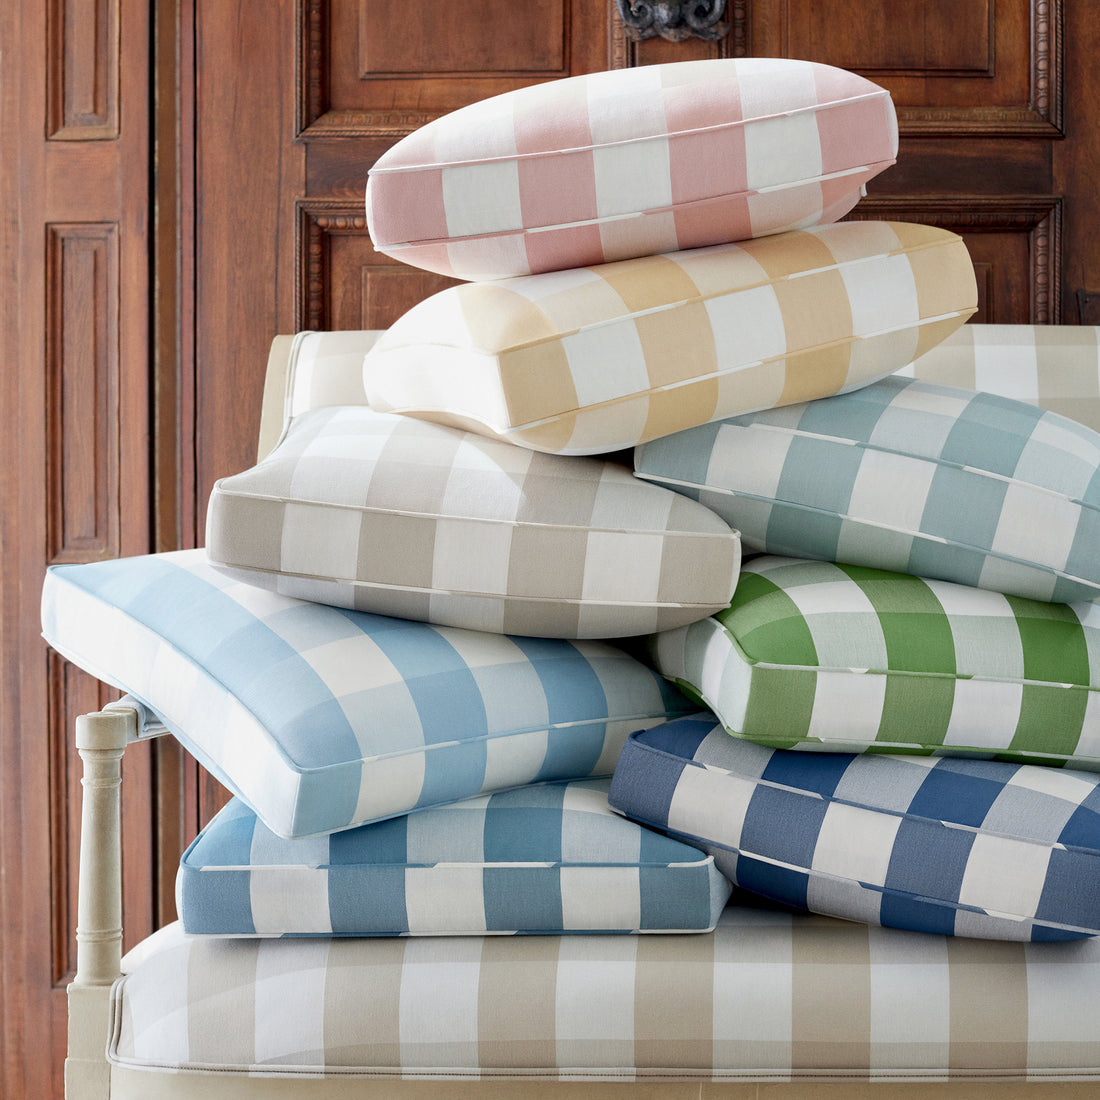 Pillows in Hammond Check woven fabric - pattern number AW24506 - by Anna French in the Devon collection